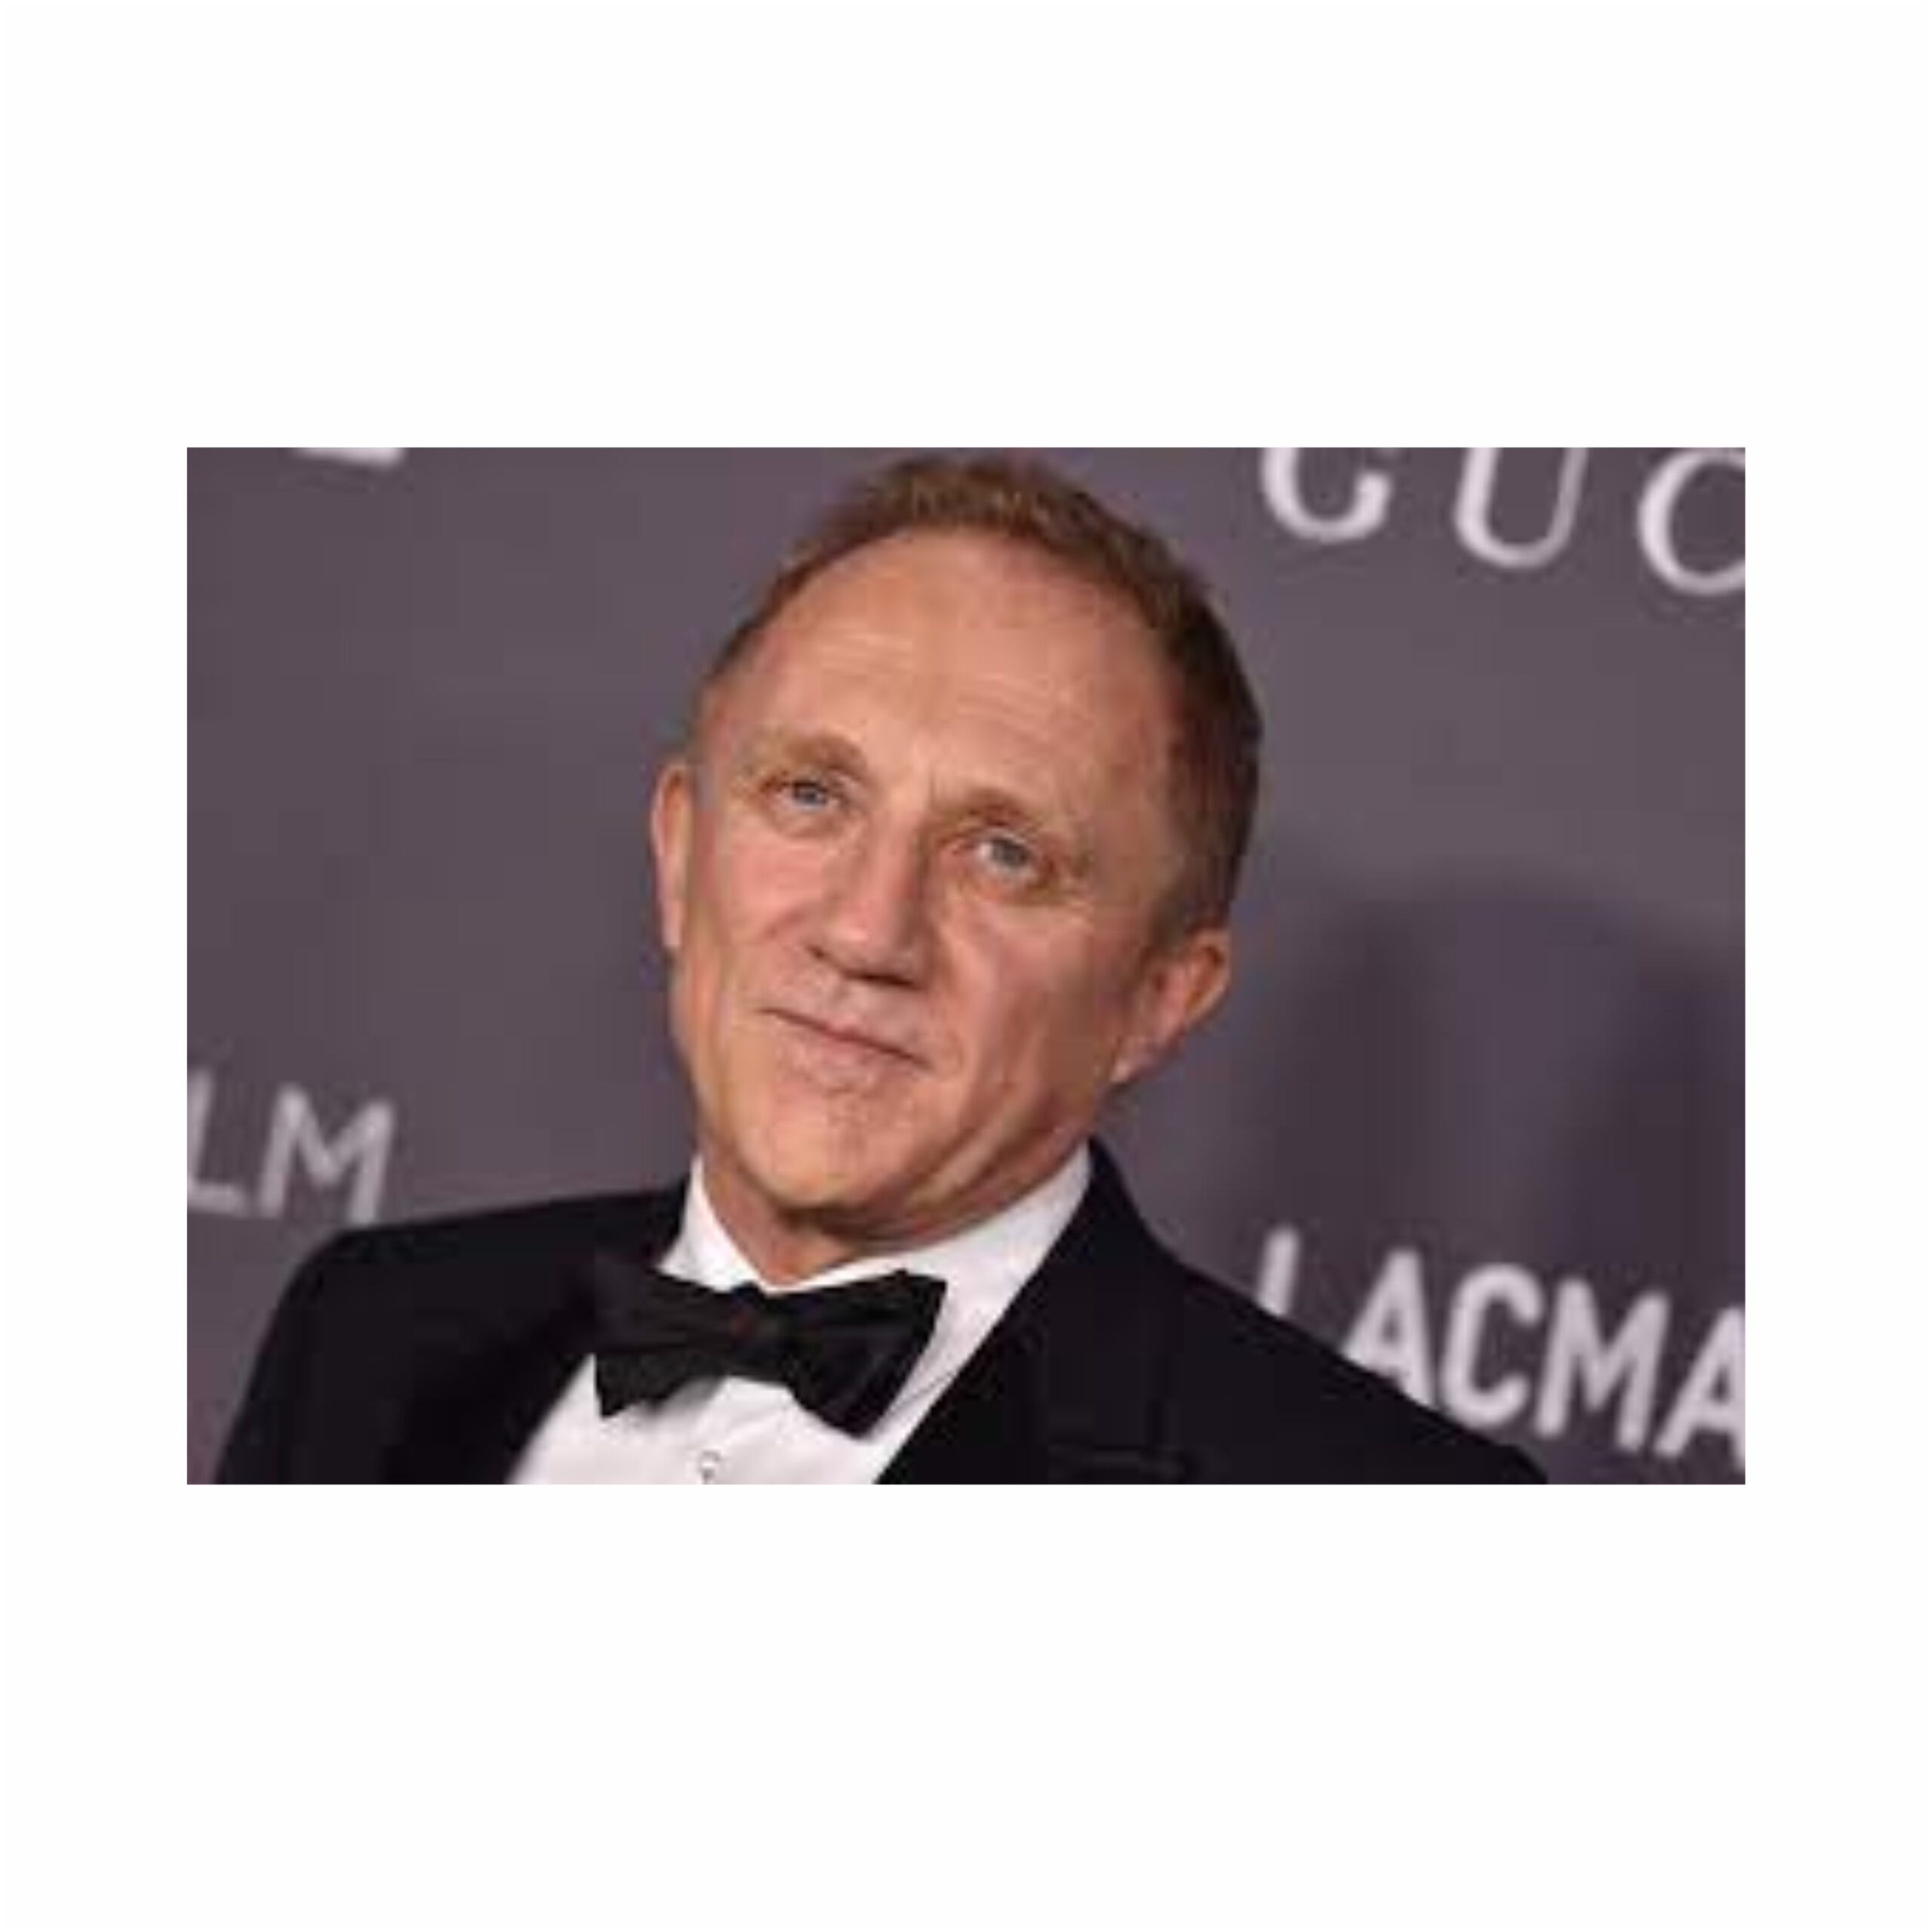 François-Henri Pinault (born on 1962 in France) President and CEO of Kering since 2005